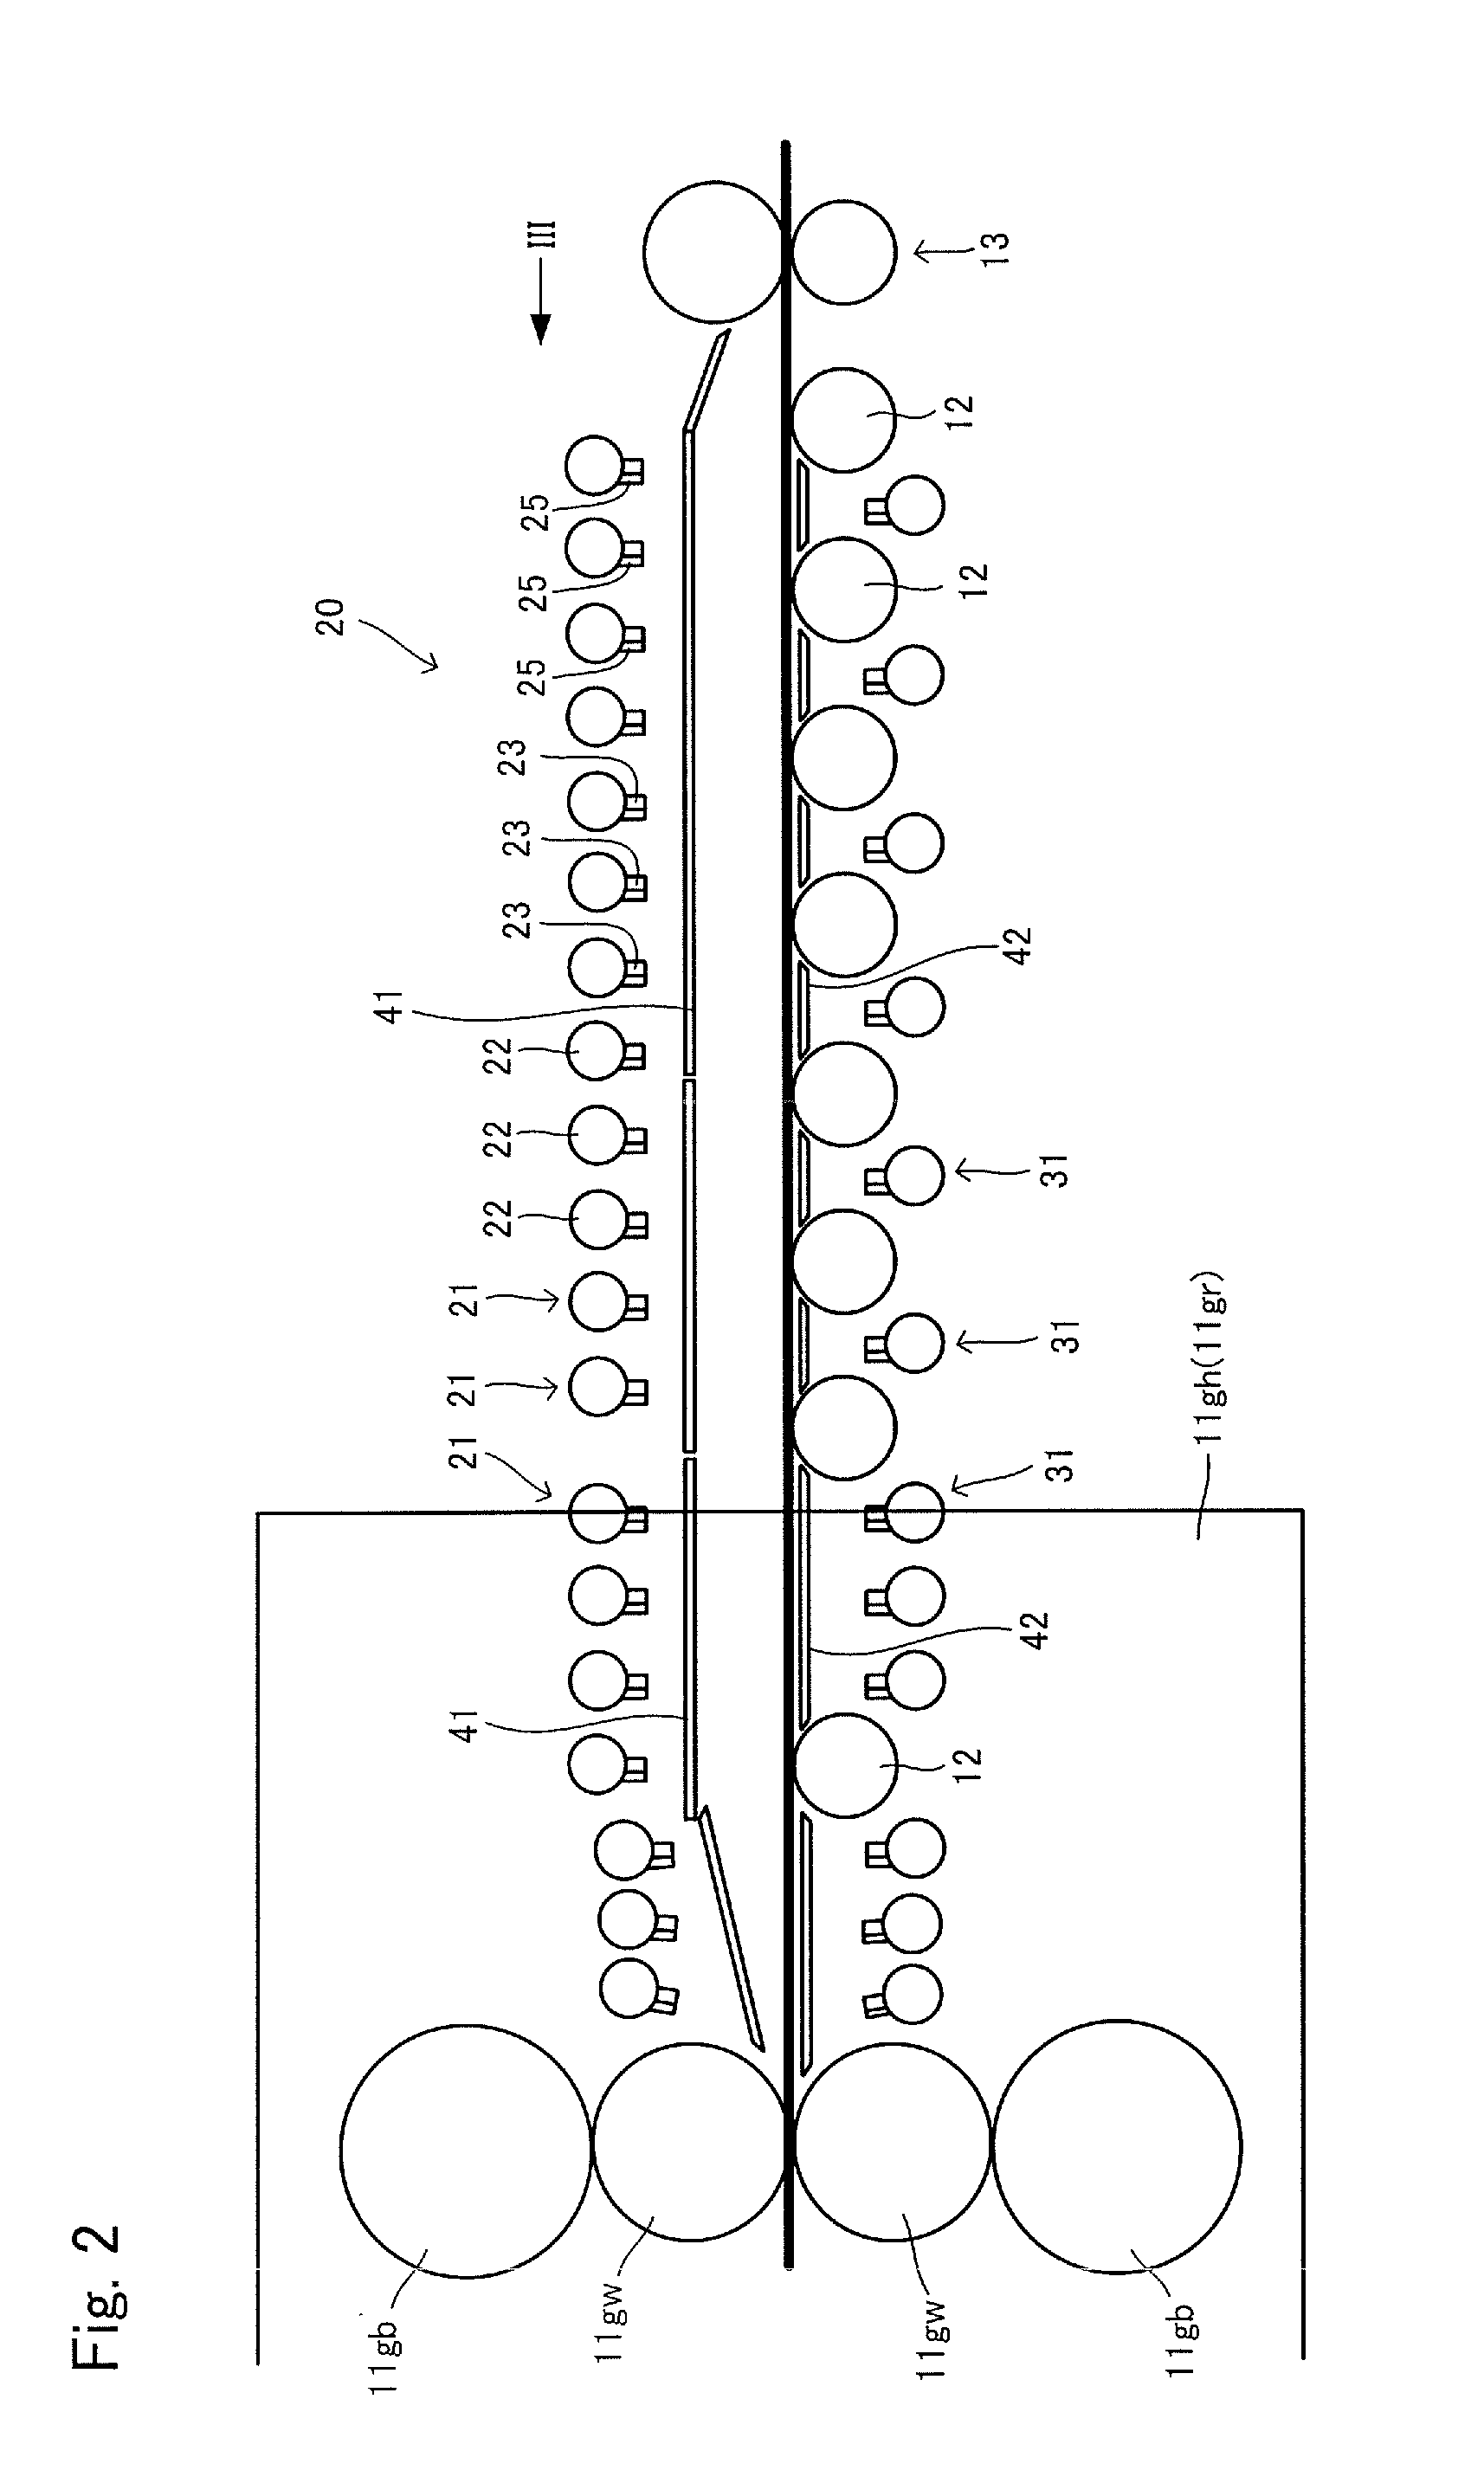 Nozzle header, cooling apparatus, manufacturing apparatus of hot-rolled steel sheet, and method for manufacturing hot-rolled steel sheet